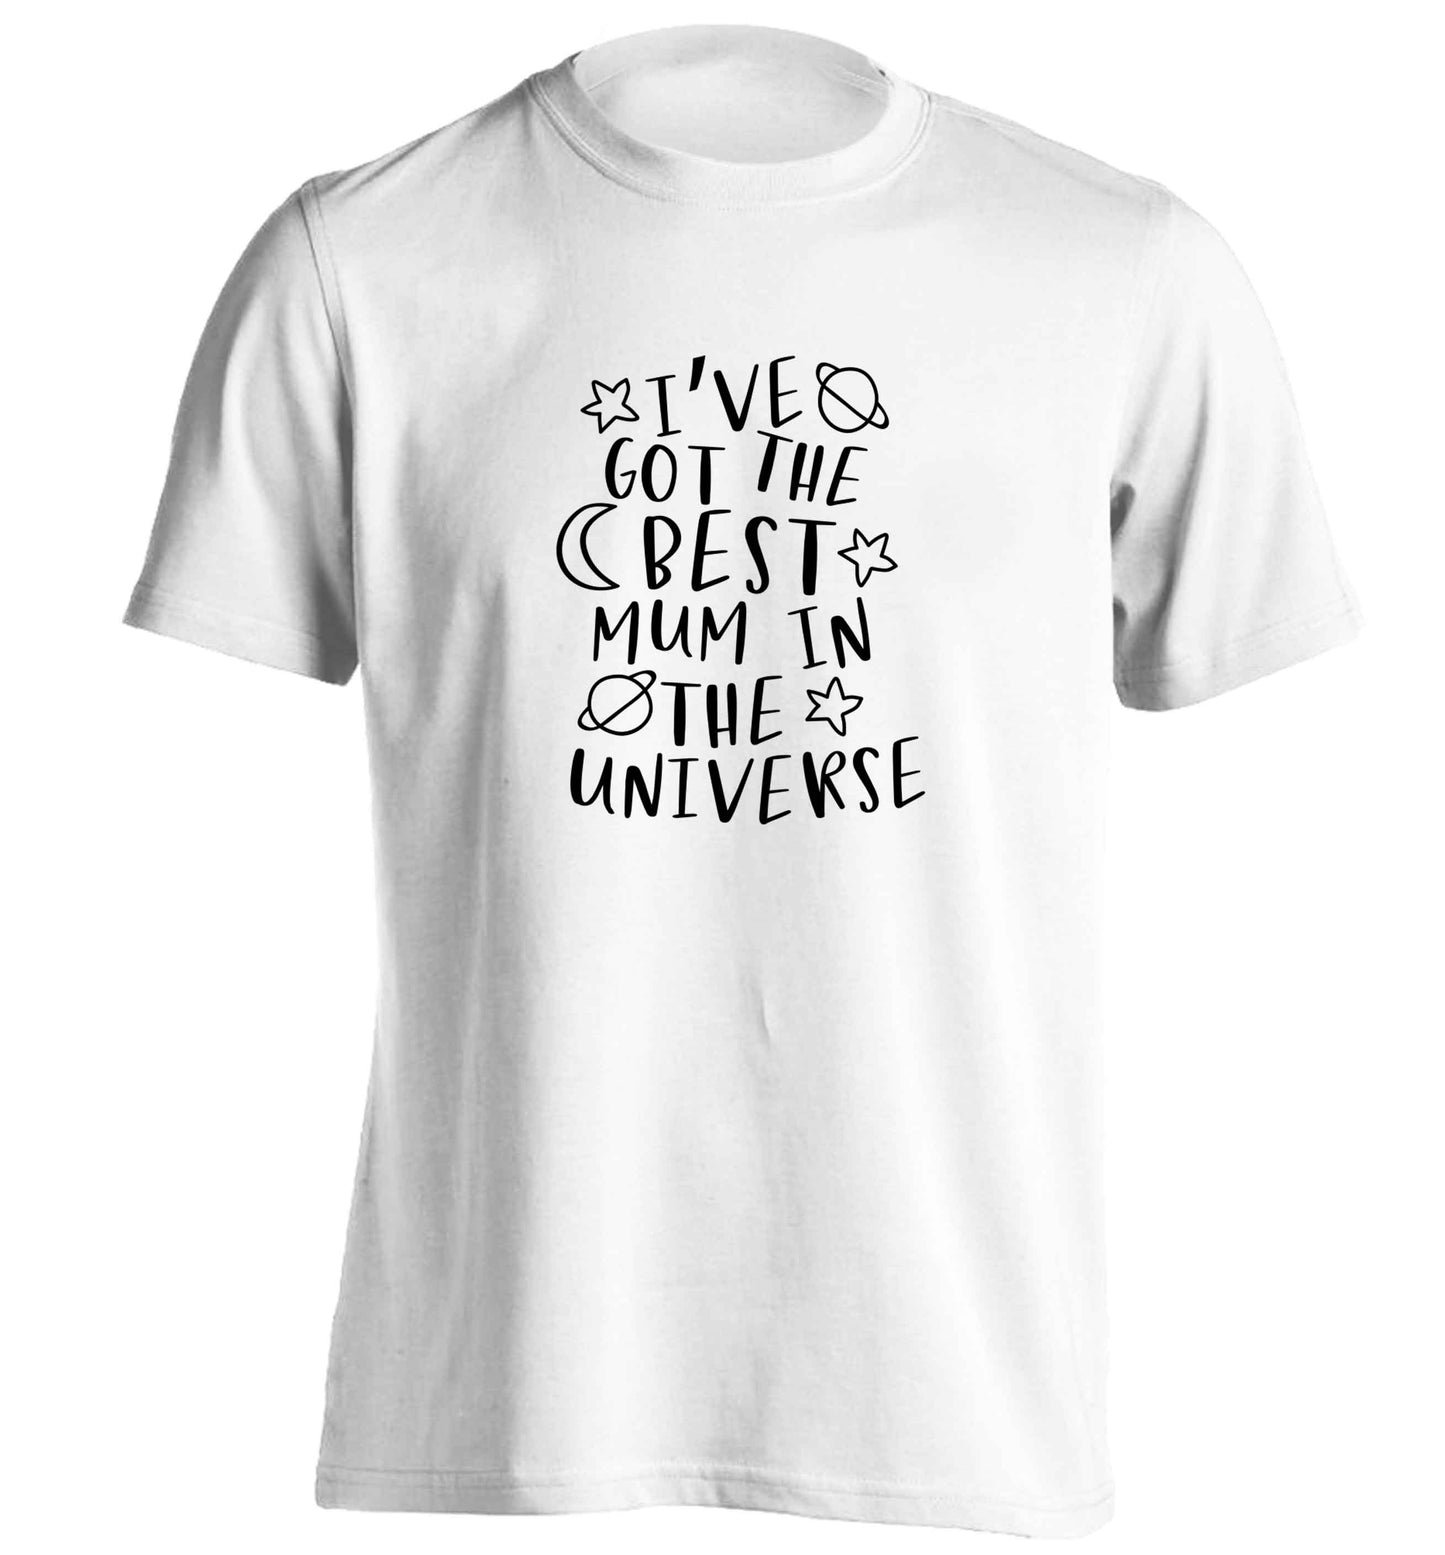 I have the best mummy in the whole wide world adults unisex white Tshirt 2XL